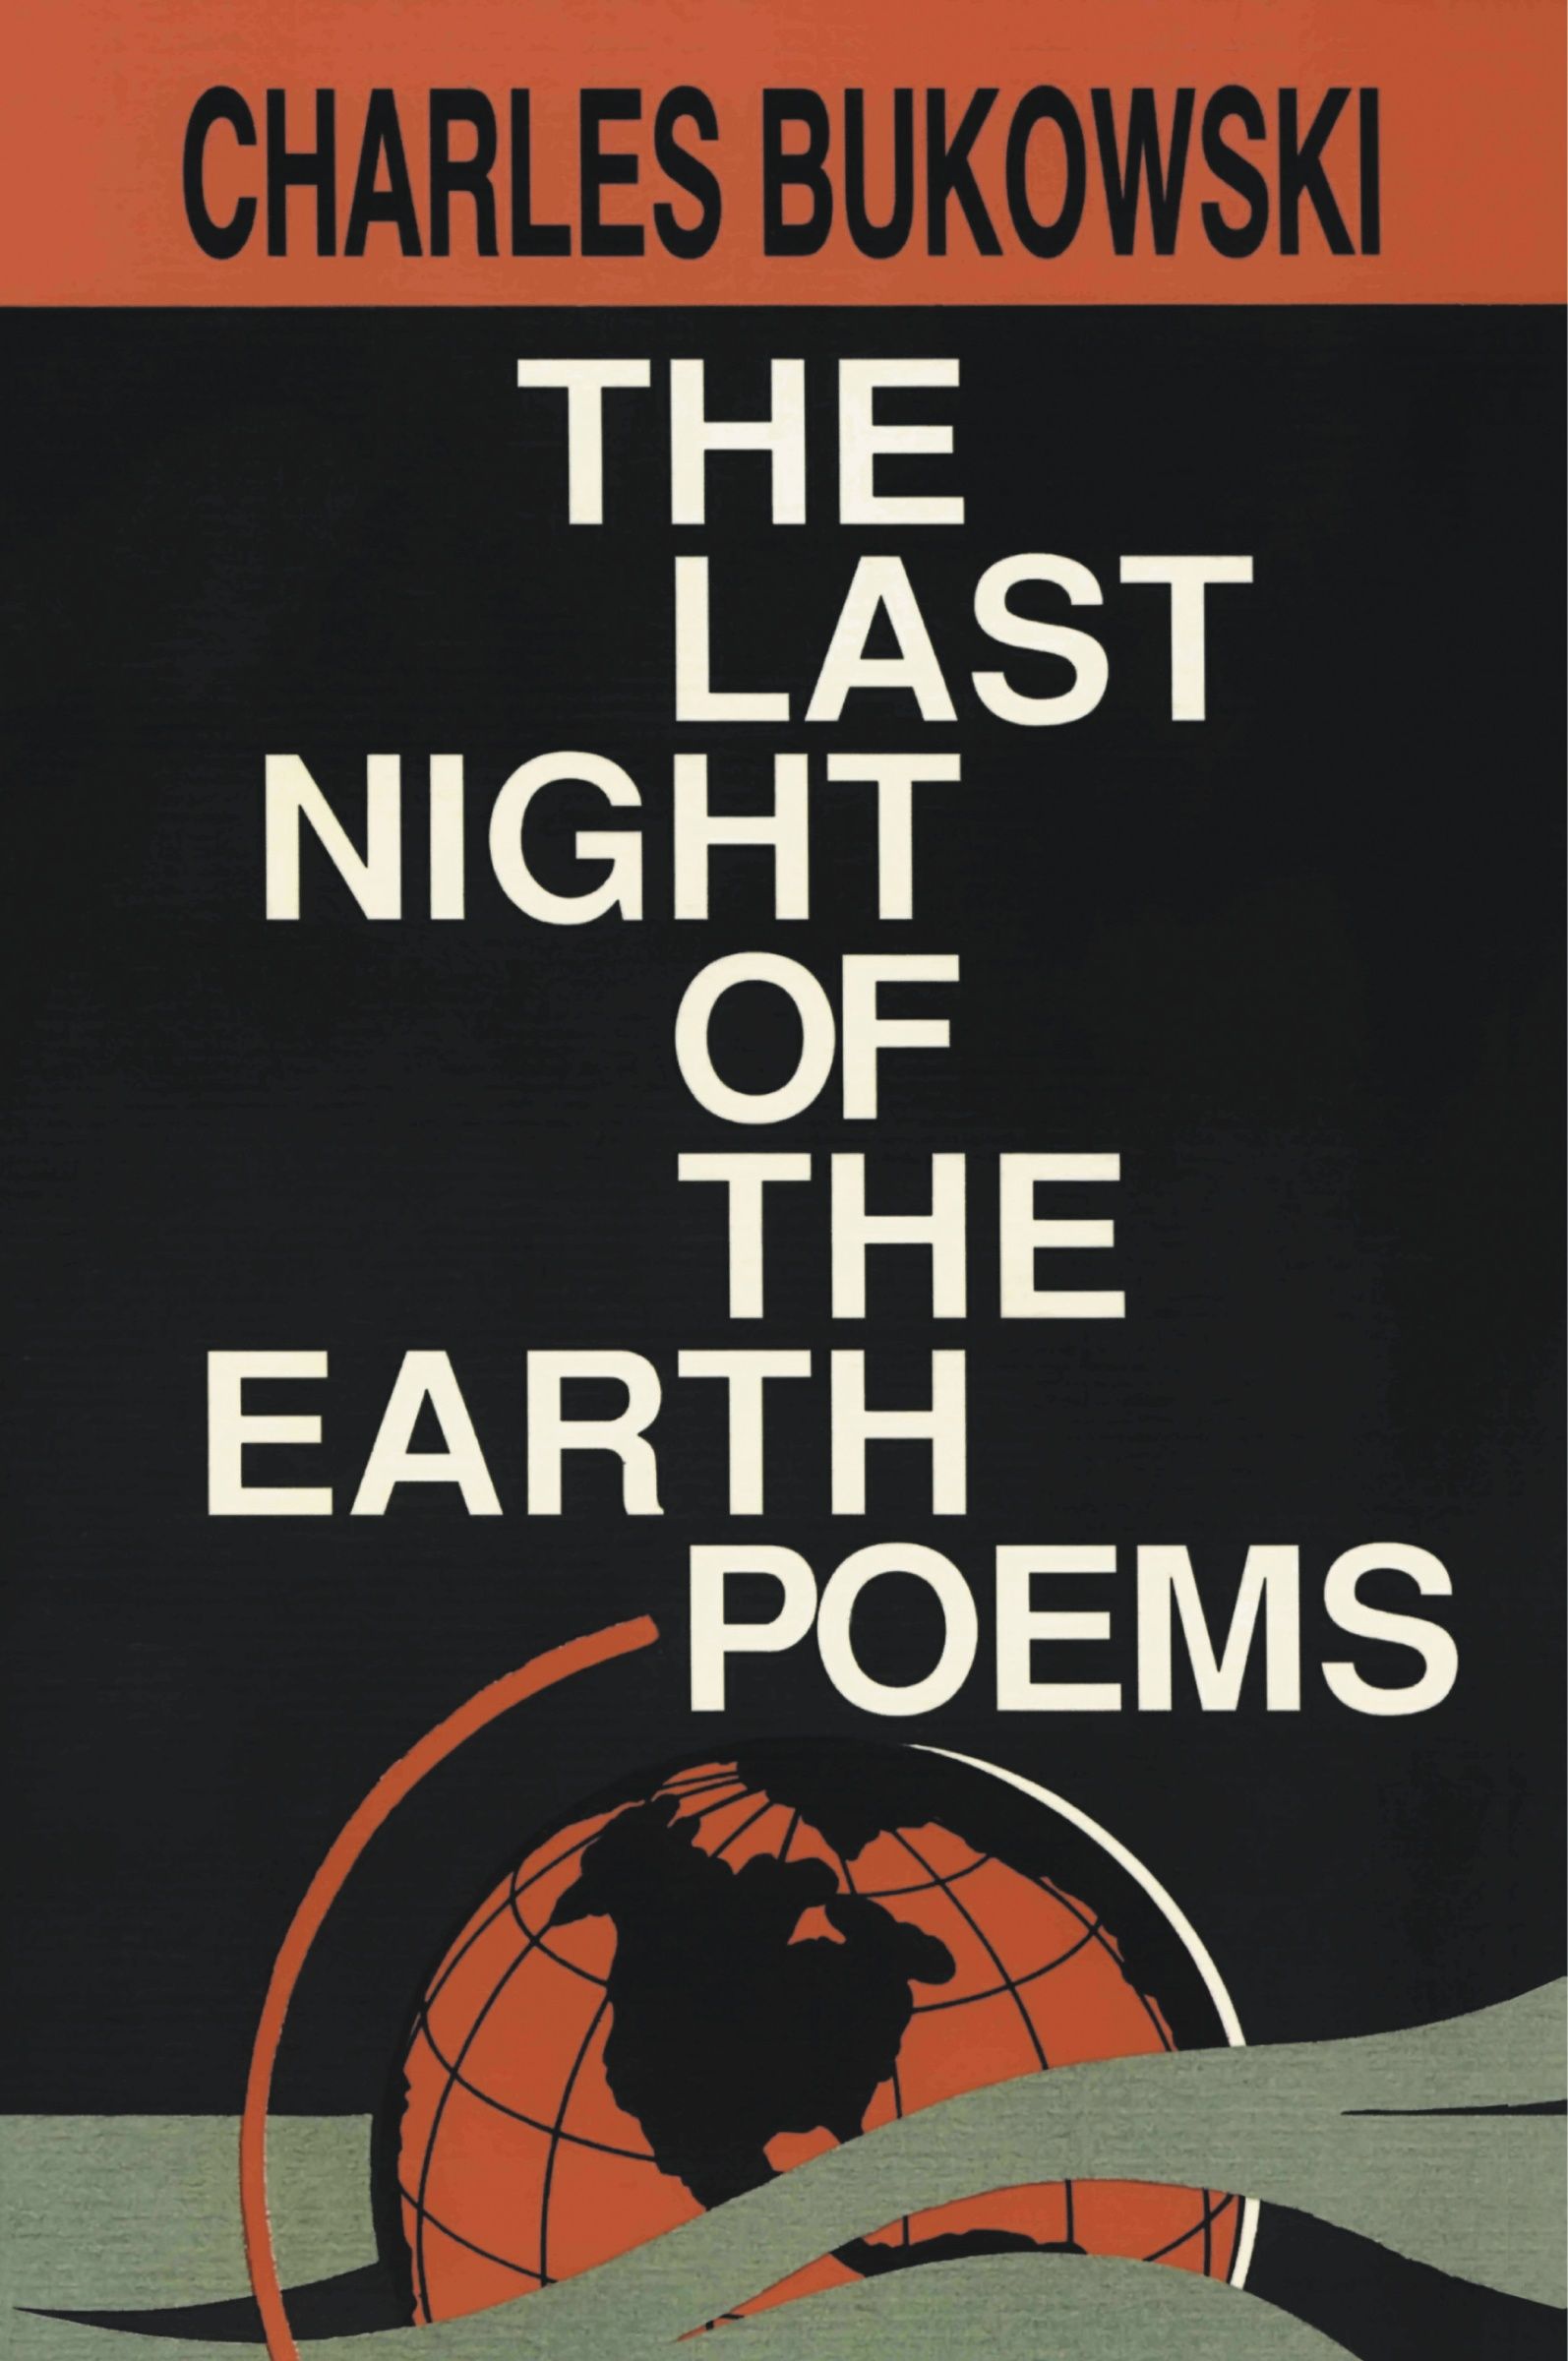 The Last Night of the Earth Poems, Literature, Culture & Art, Paperback, Charles Bukowski